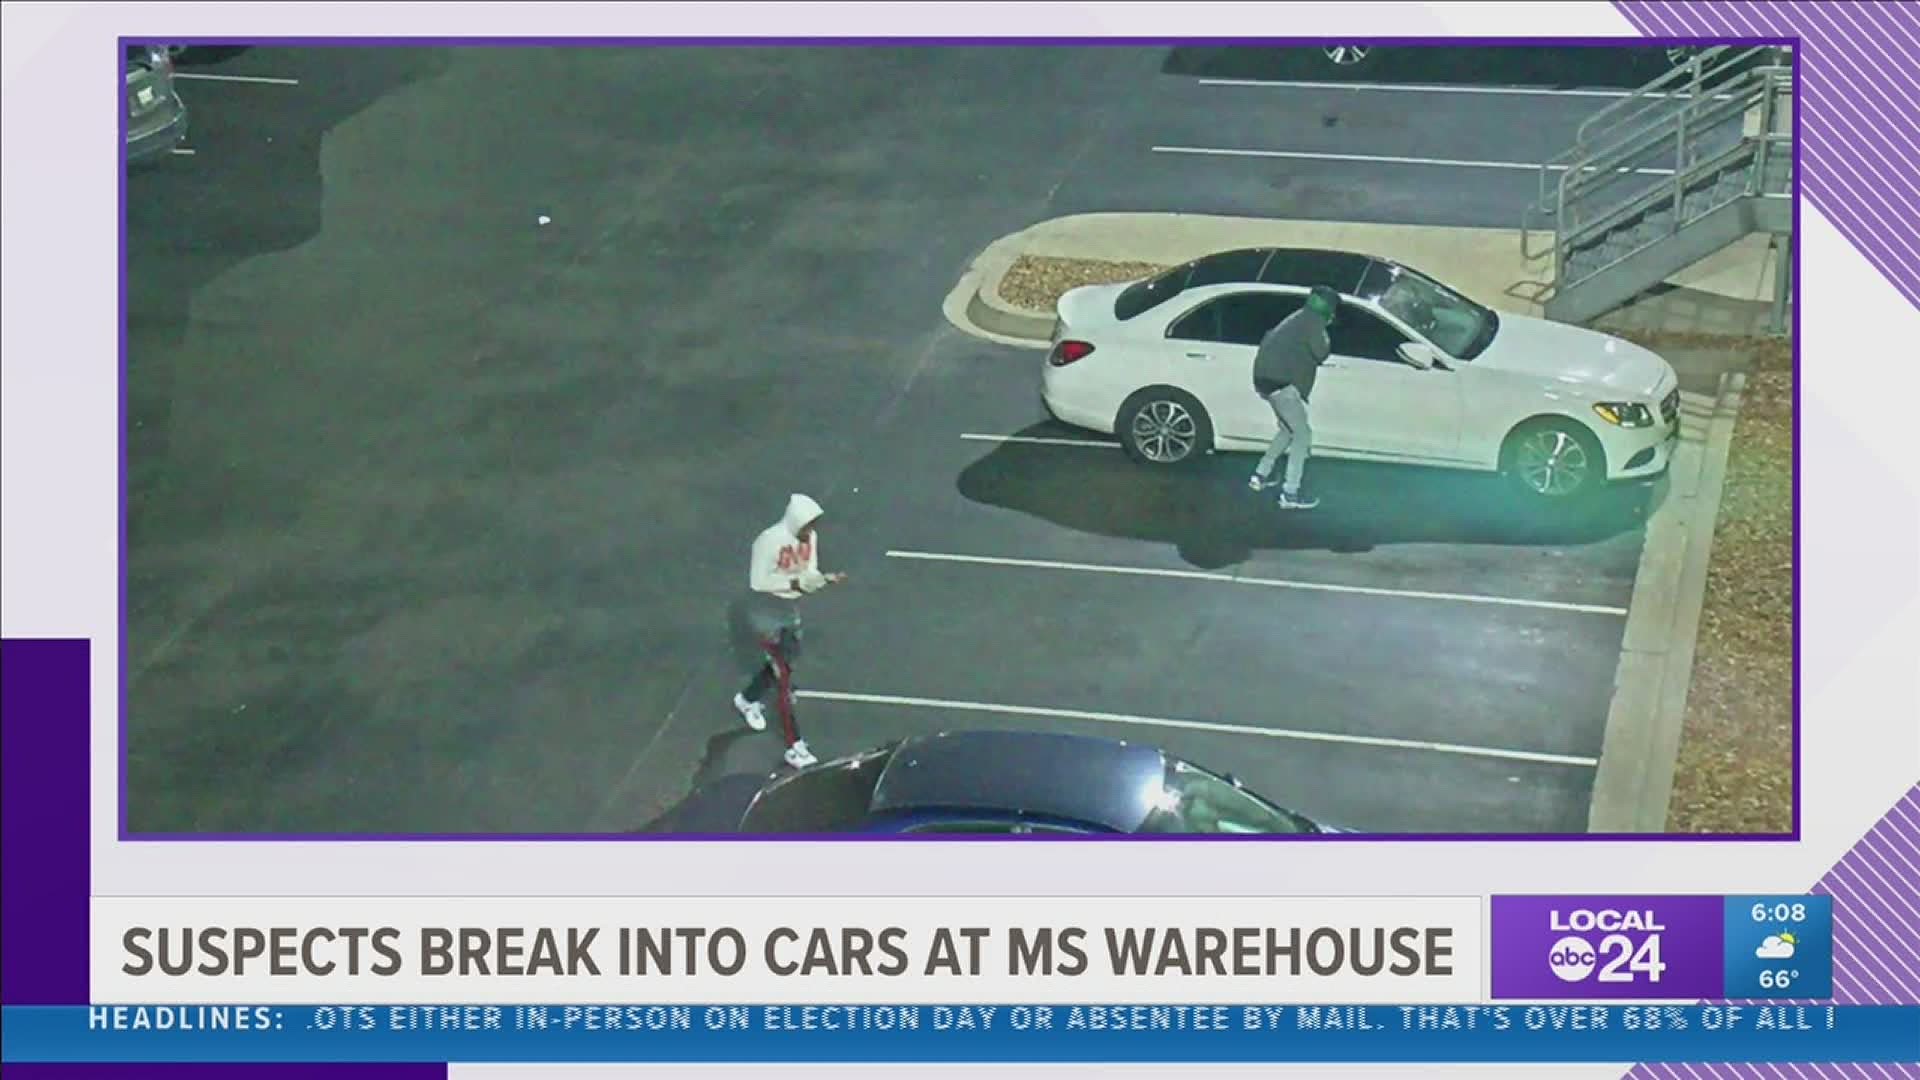 It happened about 9:30 p.m. Wednesday in the parking lot of the Sephora warehouse in the 8500 block of Nail Road.